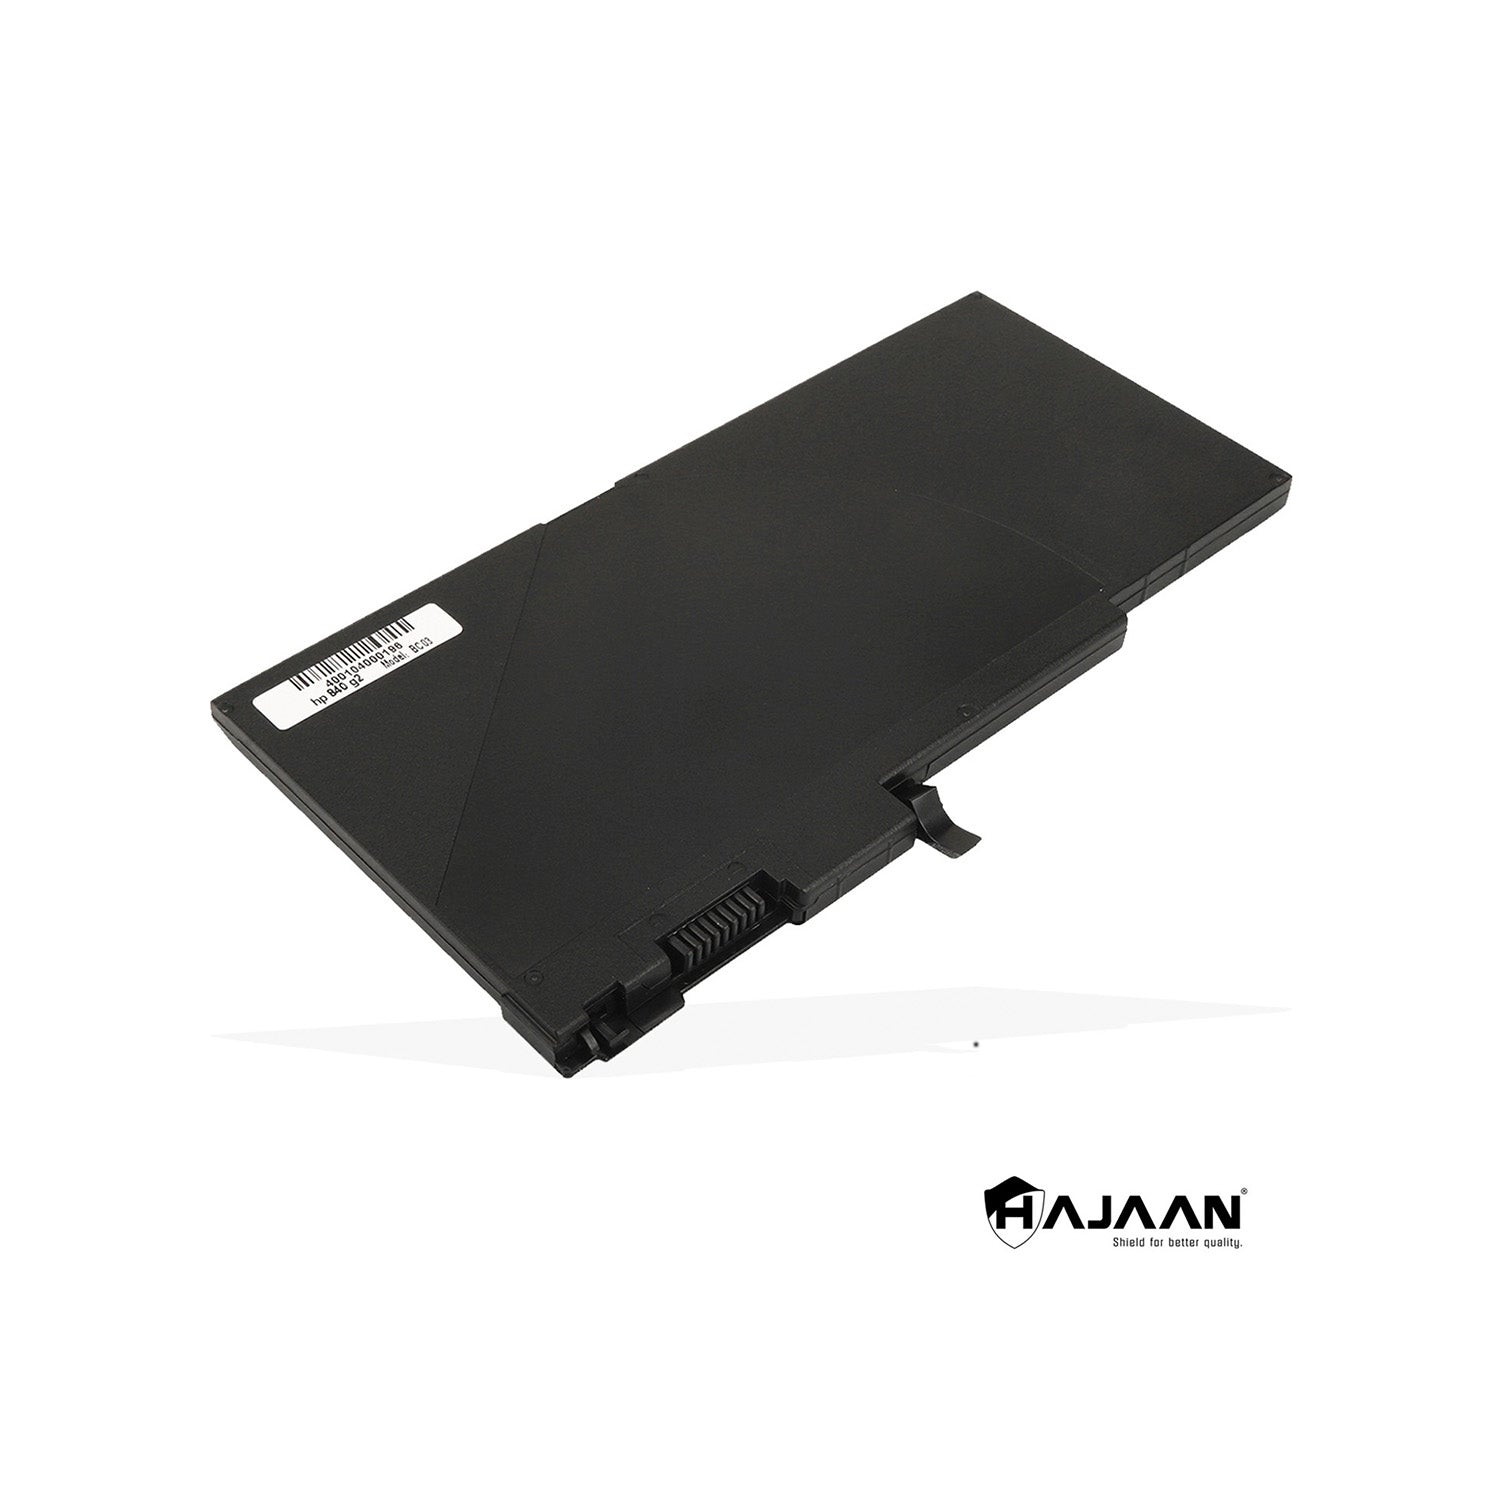 HAJAAN Brand New Laptop Batteries for HP EliteBook 840 G1 G2 / 740 G1 G2 / 745 G1 G2 G3 / 850 G1 G2 G3 / ZBook 14 G2 CM03(Li-polymer, 3900mAh, 3-Cells,11.1V), 1 Year Warranty